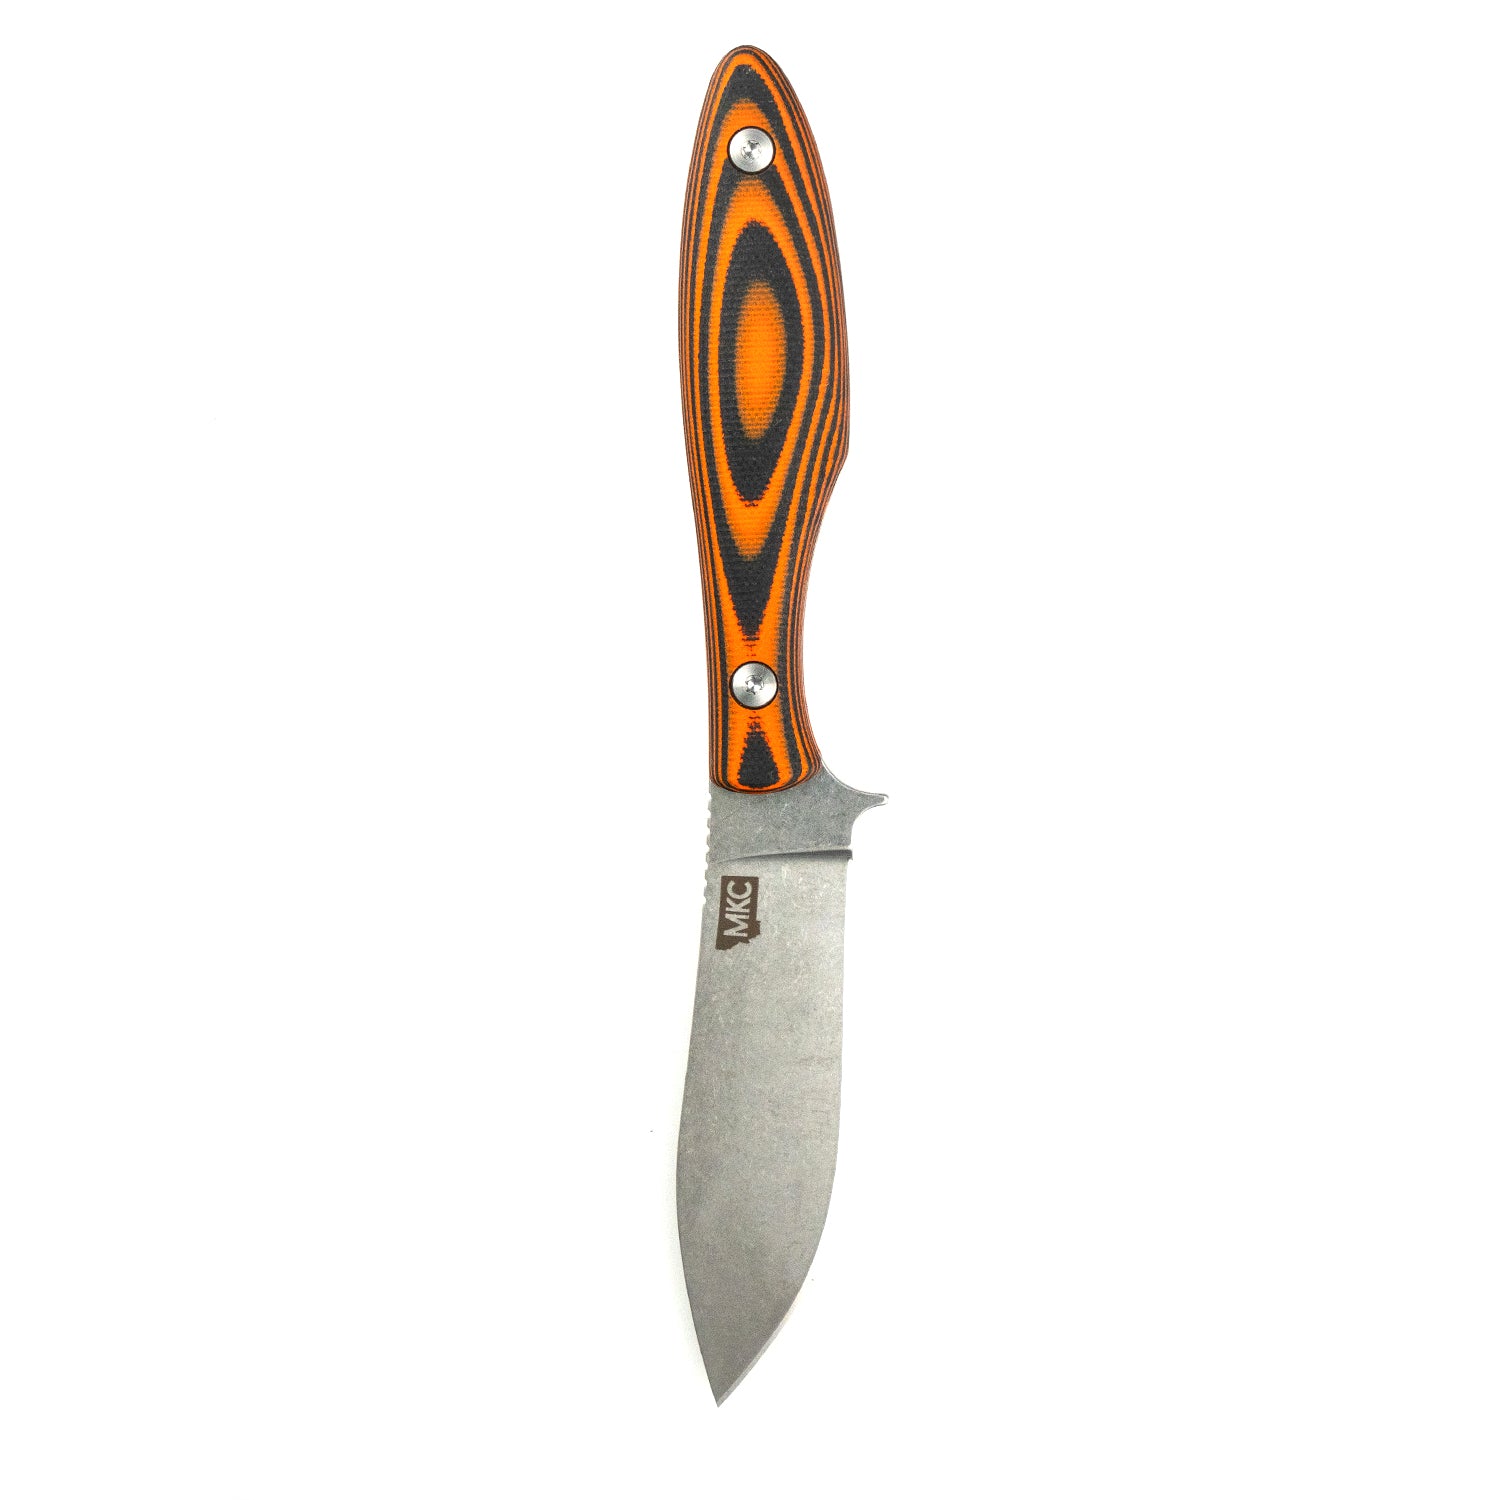 Handle Material Orange Pine Cone 3/8 x 1 5/8 x 5 - Knives for Sale